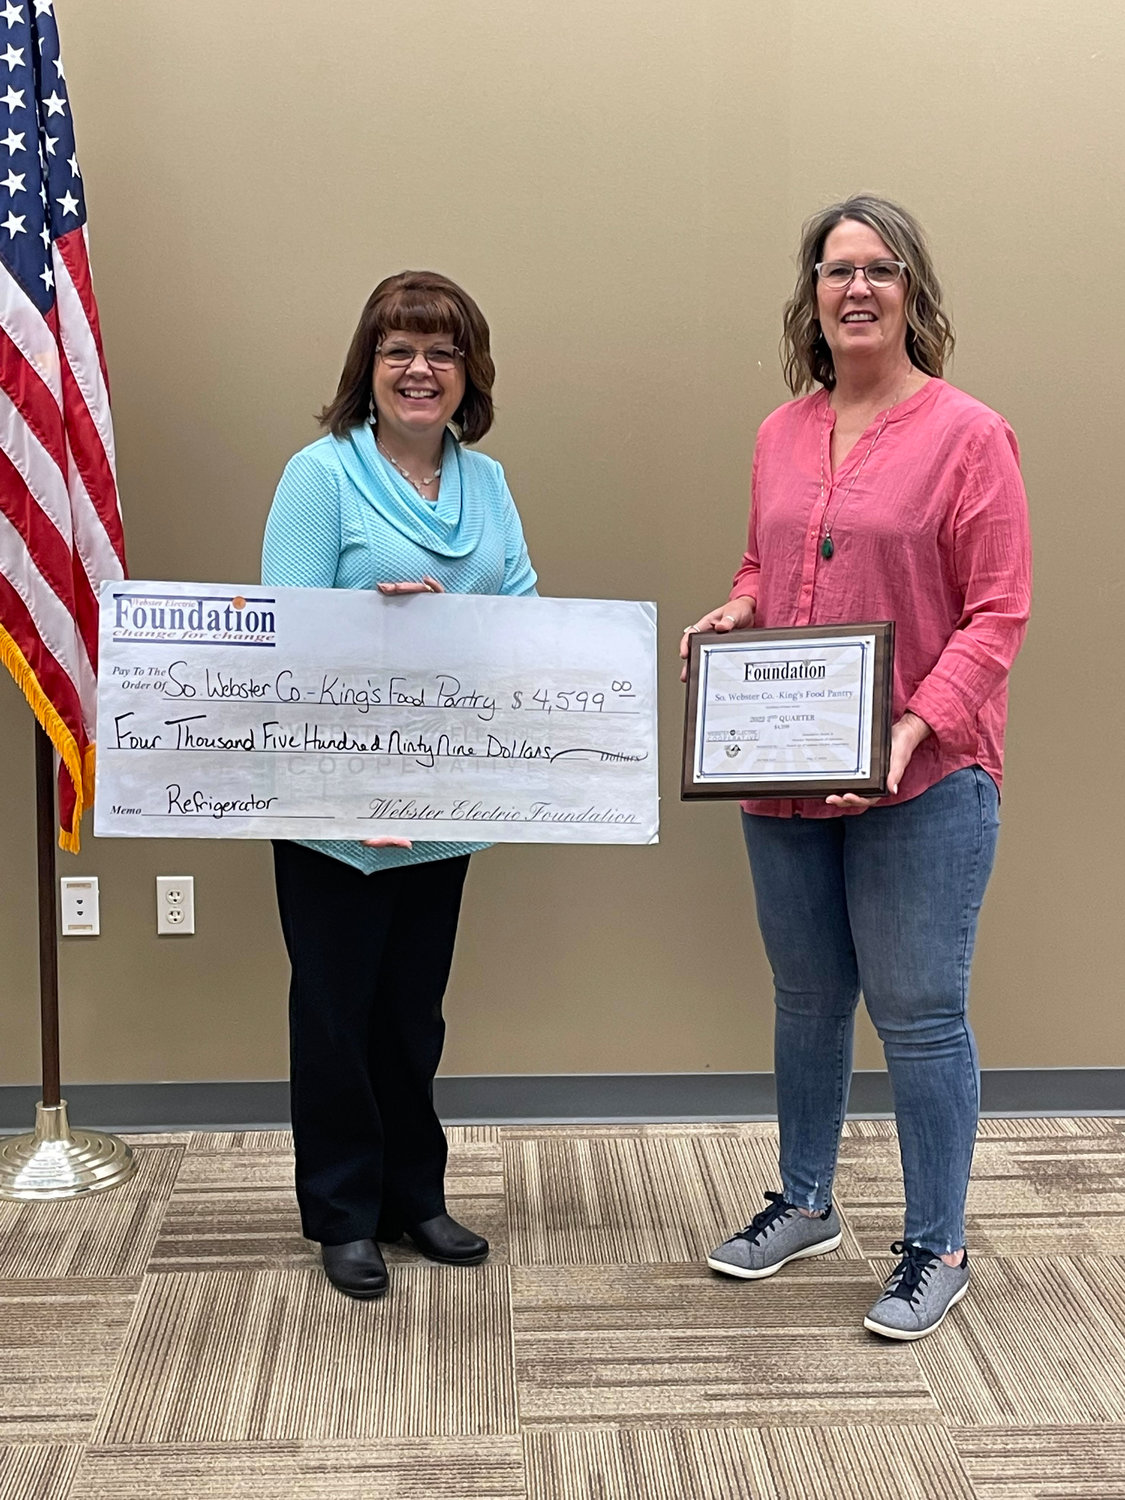 A member of the Southern Webster County Food Pantry DBA King’s Food Pantry accepts the grant award in the amount of $4,599. The organization plans to purchase a large industrial size refrigerator to replace three old models.